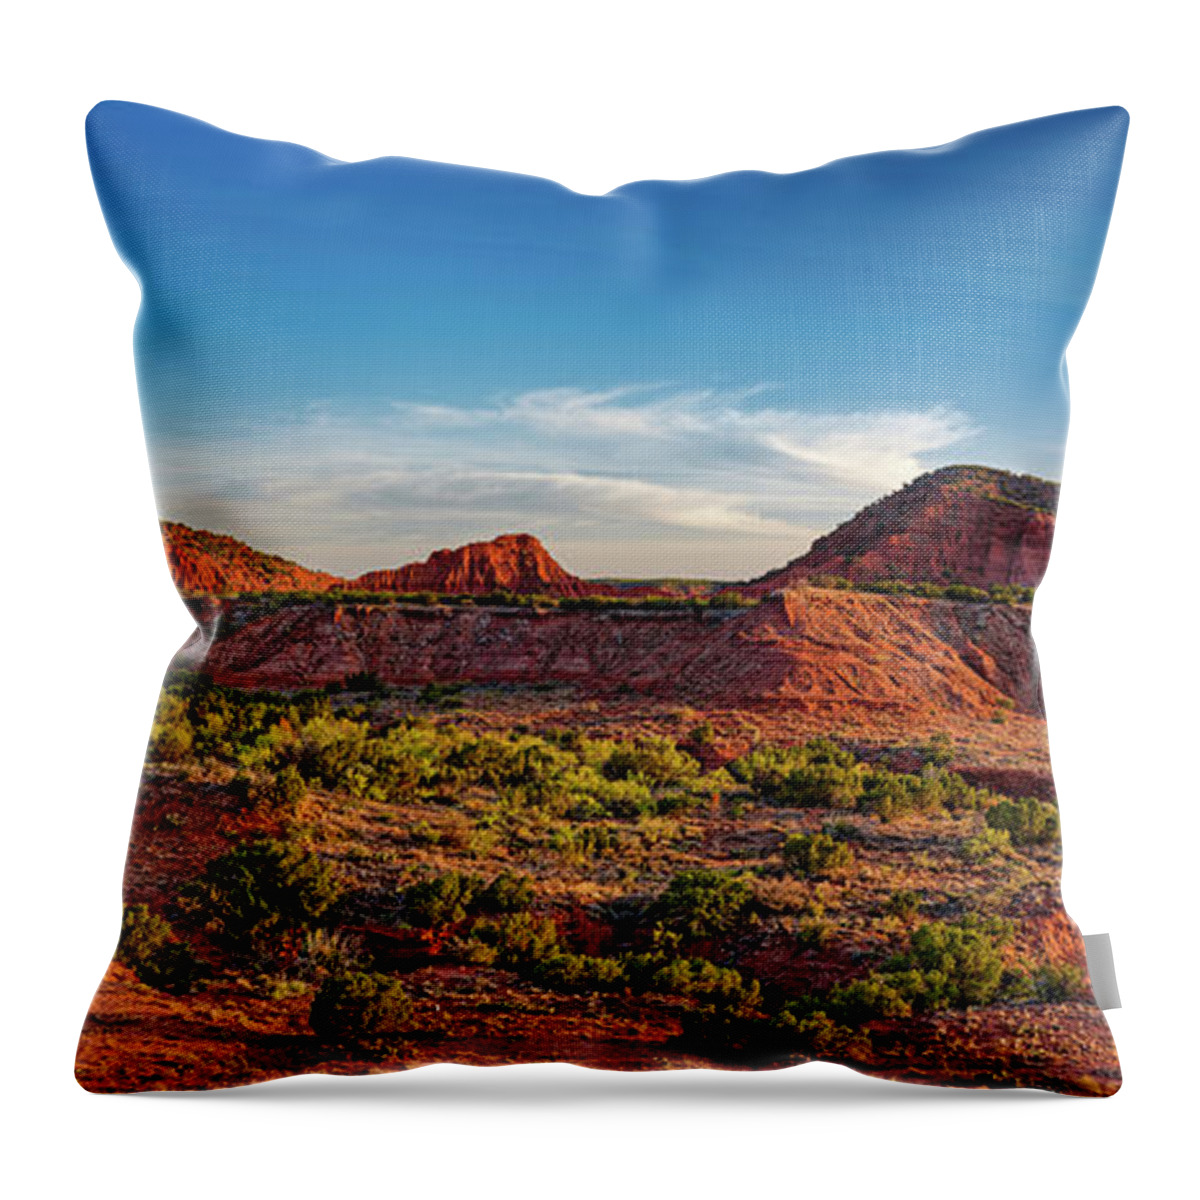 Caprock Canyons Throw Pillow featuring the photograph Glowing Red Sandstone at Sunrise - Caprock Canyon State Park - Quitaque Texas Panhandle by Silvio Ligutti